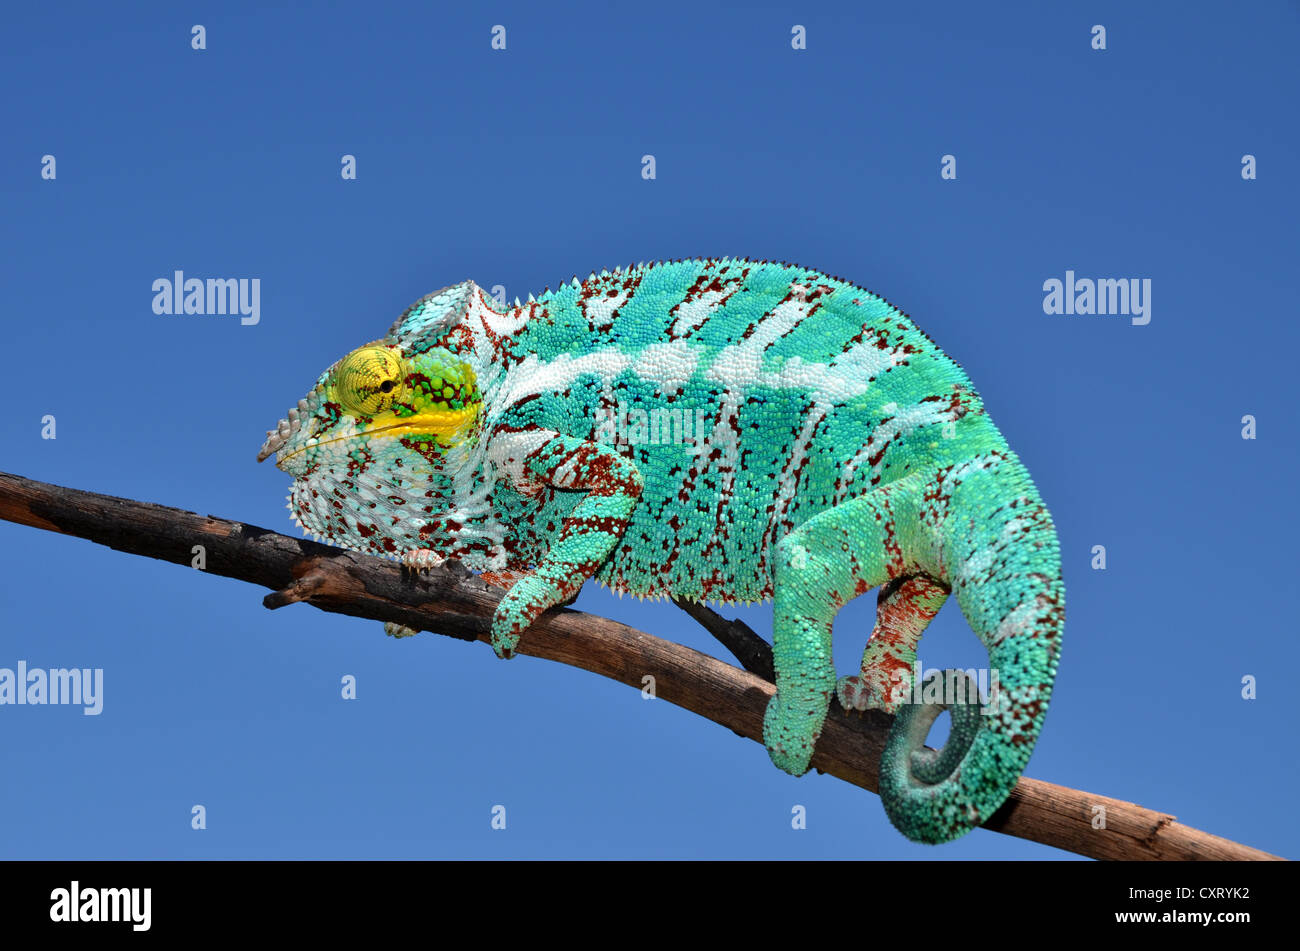 Panther Chameleon (Furcifer pardalis) sull'isola di Nosy Faly nel nord-ovest del Madagascar, Africa Foto Stock